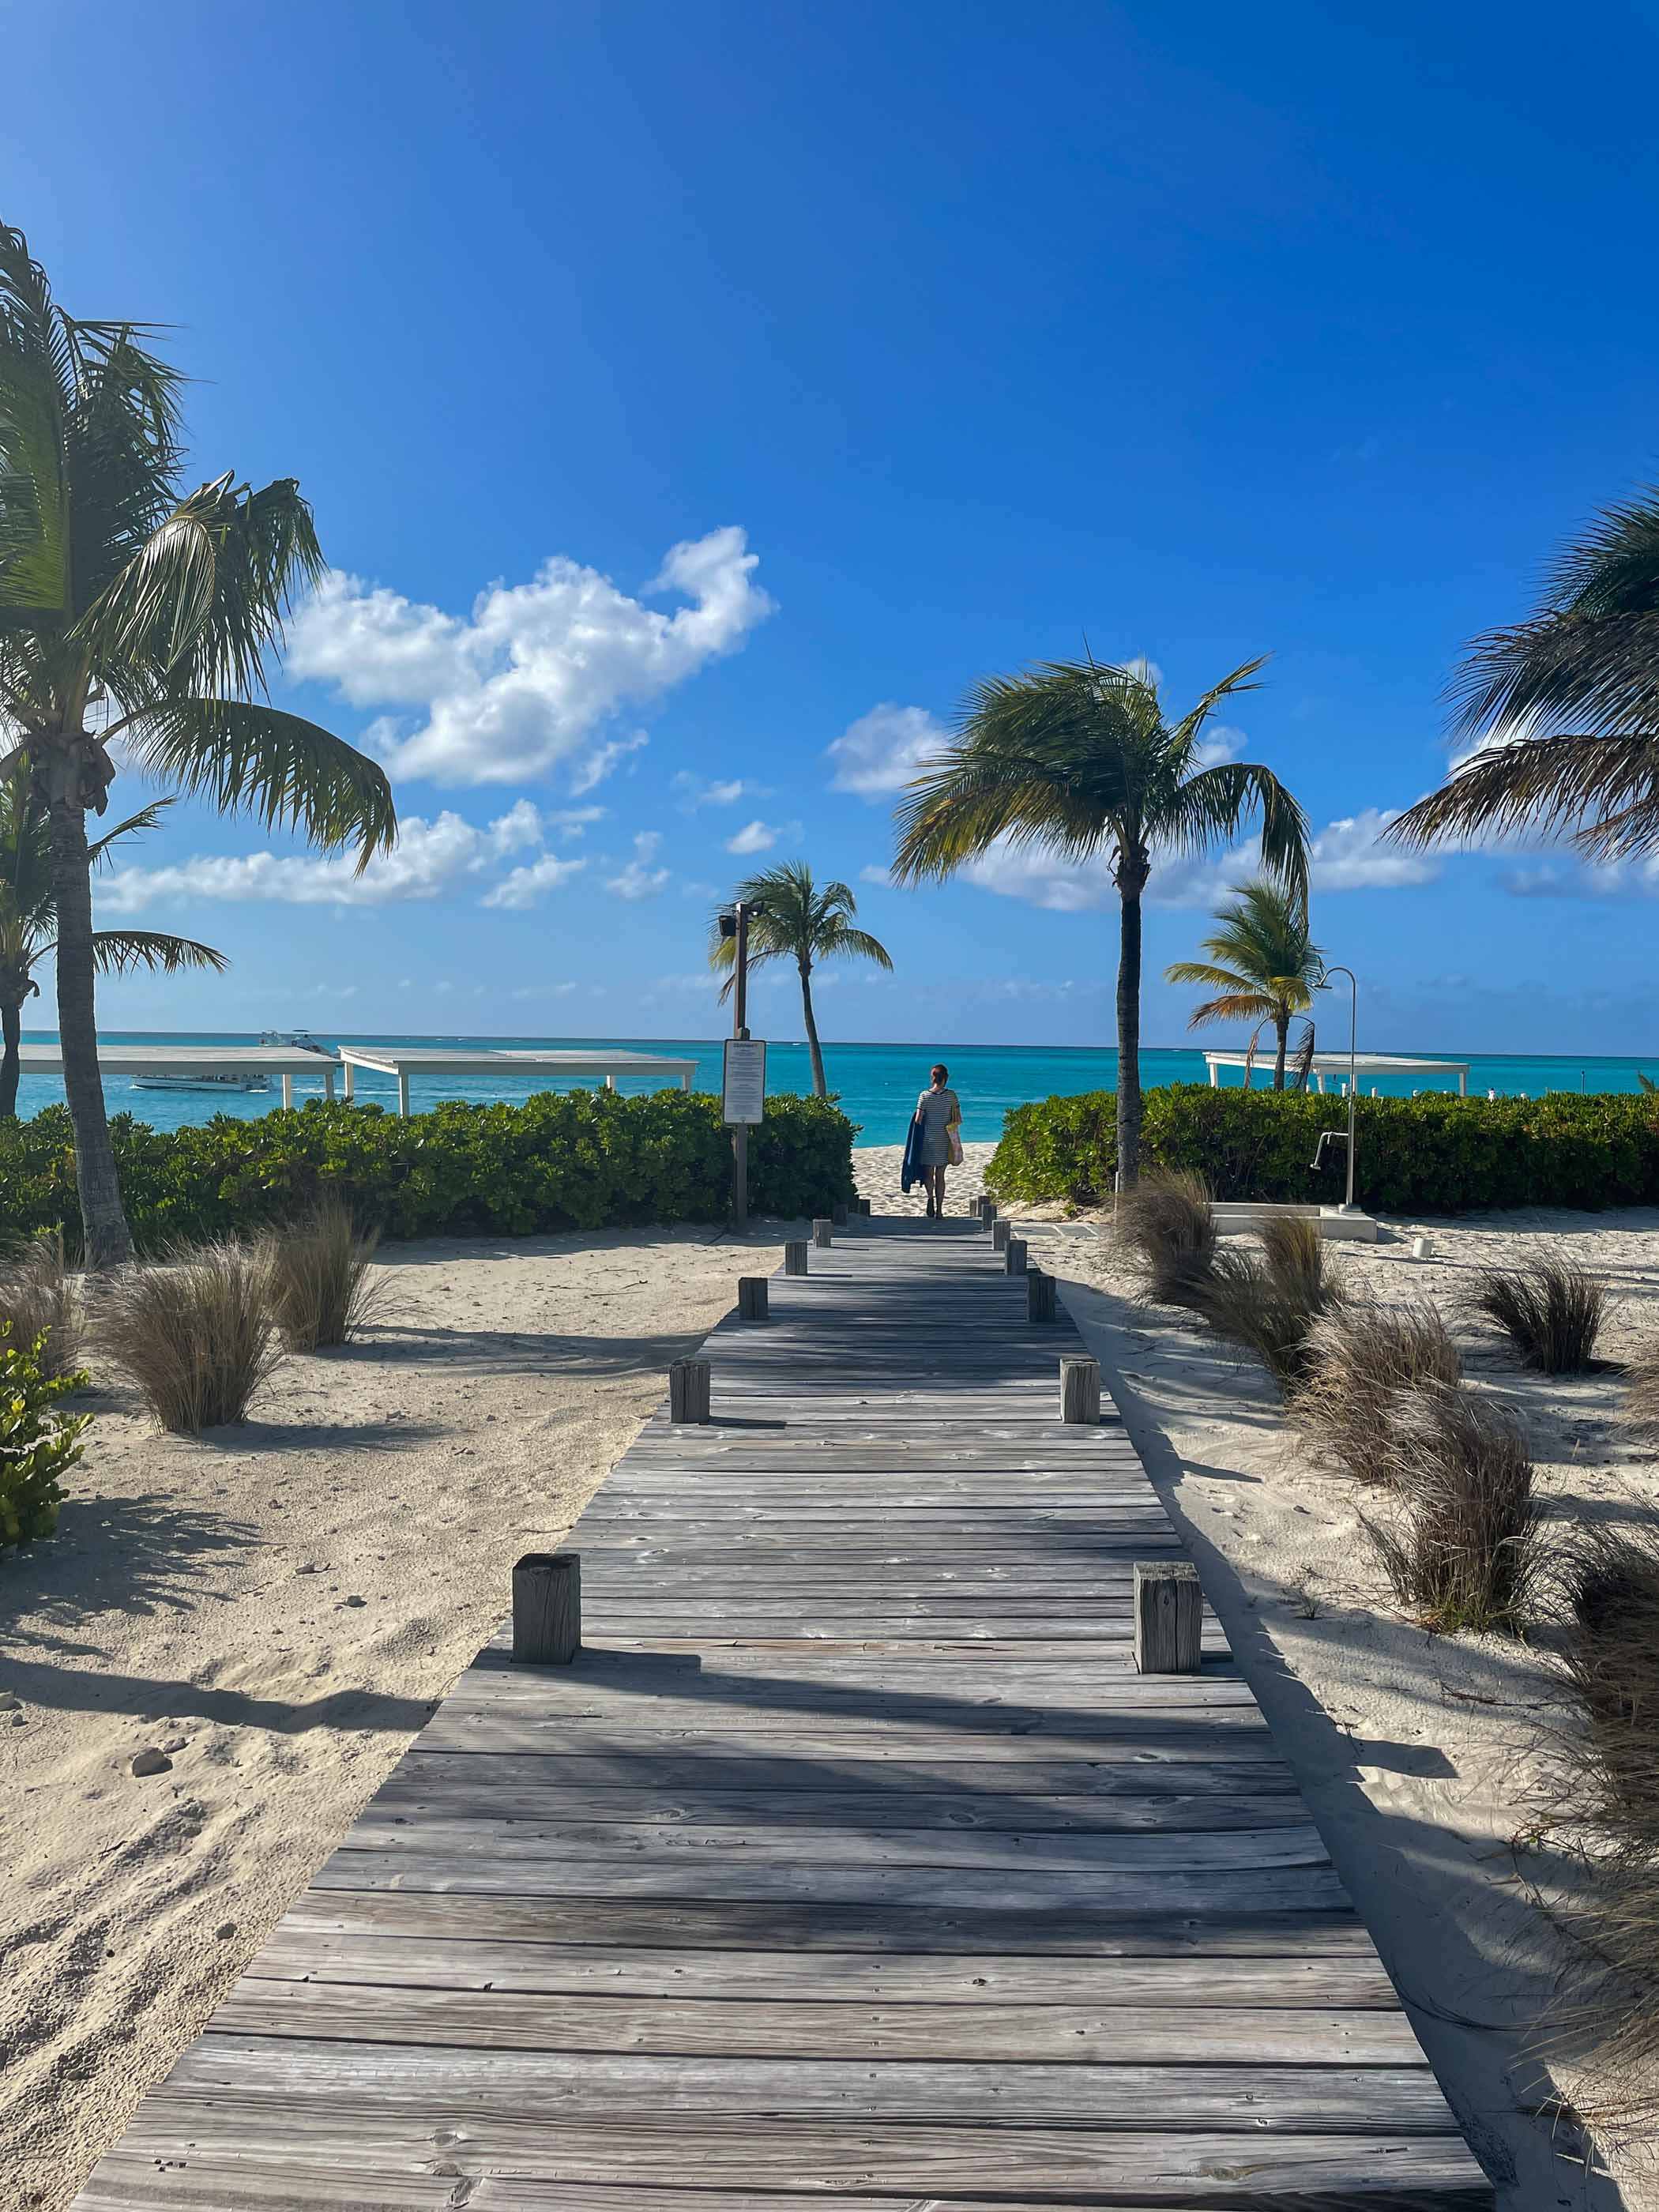 Morgan Ione Photography | Chicago Commercial Travel Photographer -  Turks and Caicos  Club Med